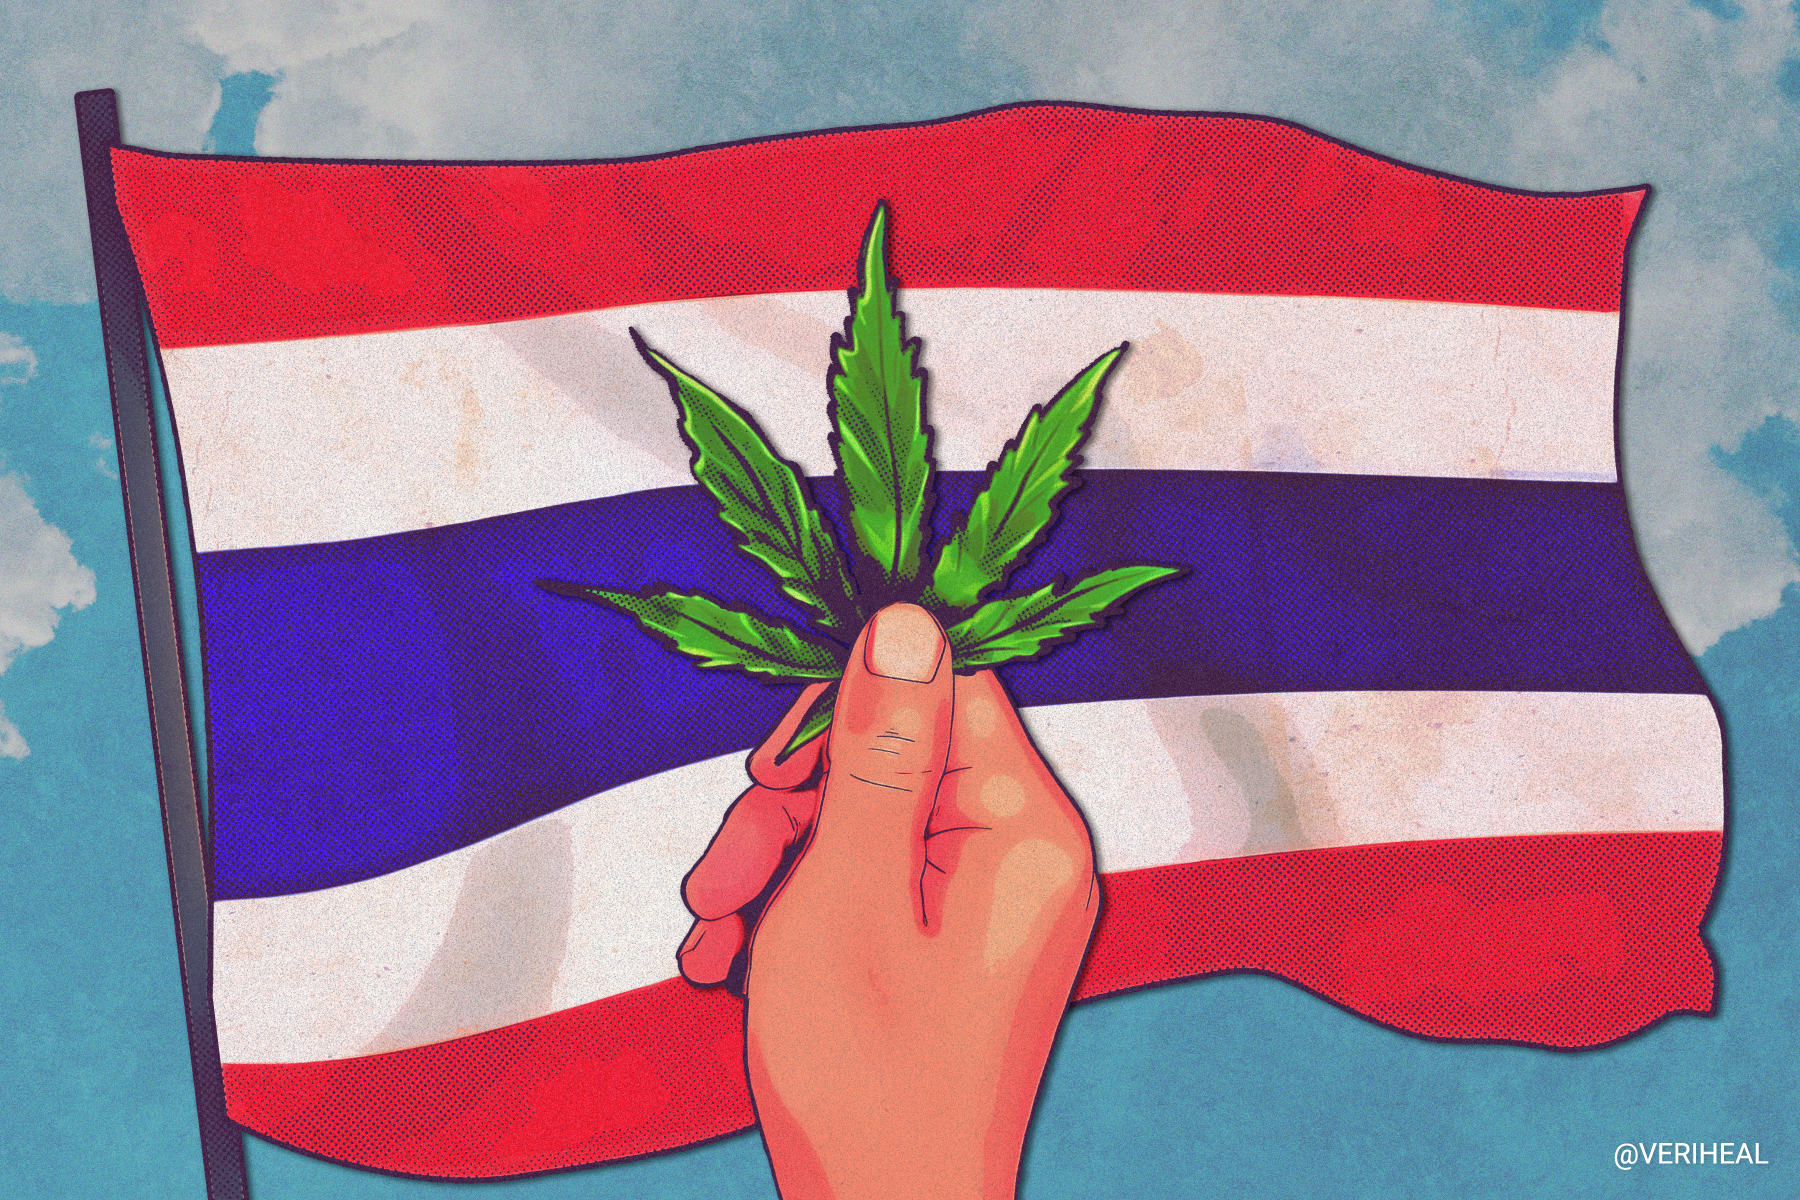 Thailand Says Yes to Cannabis